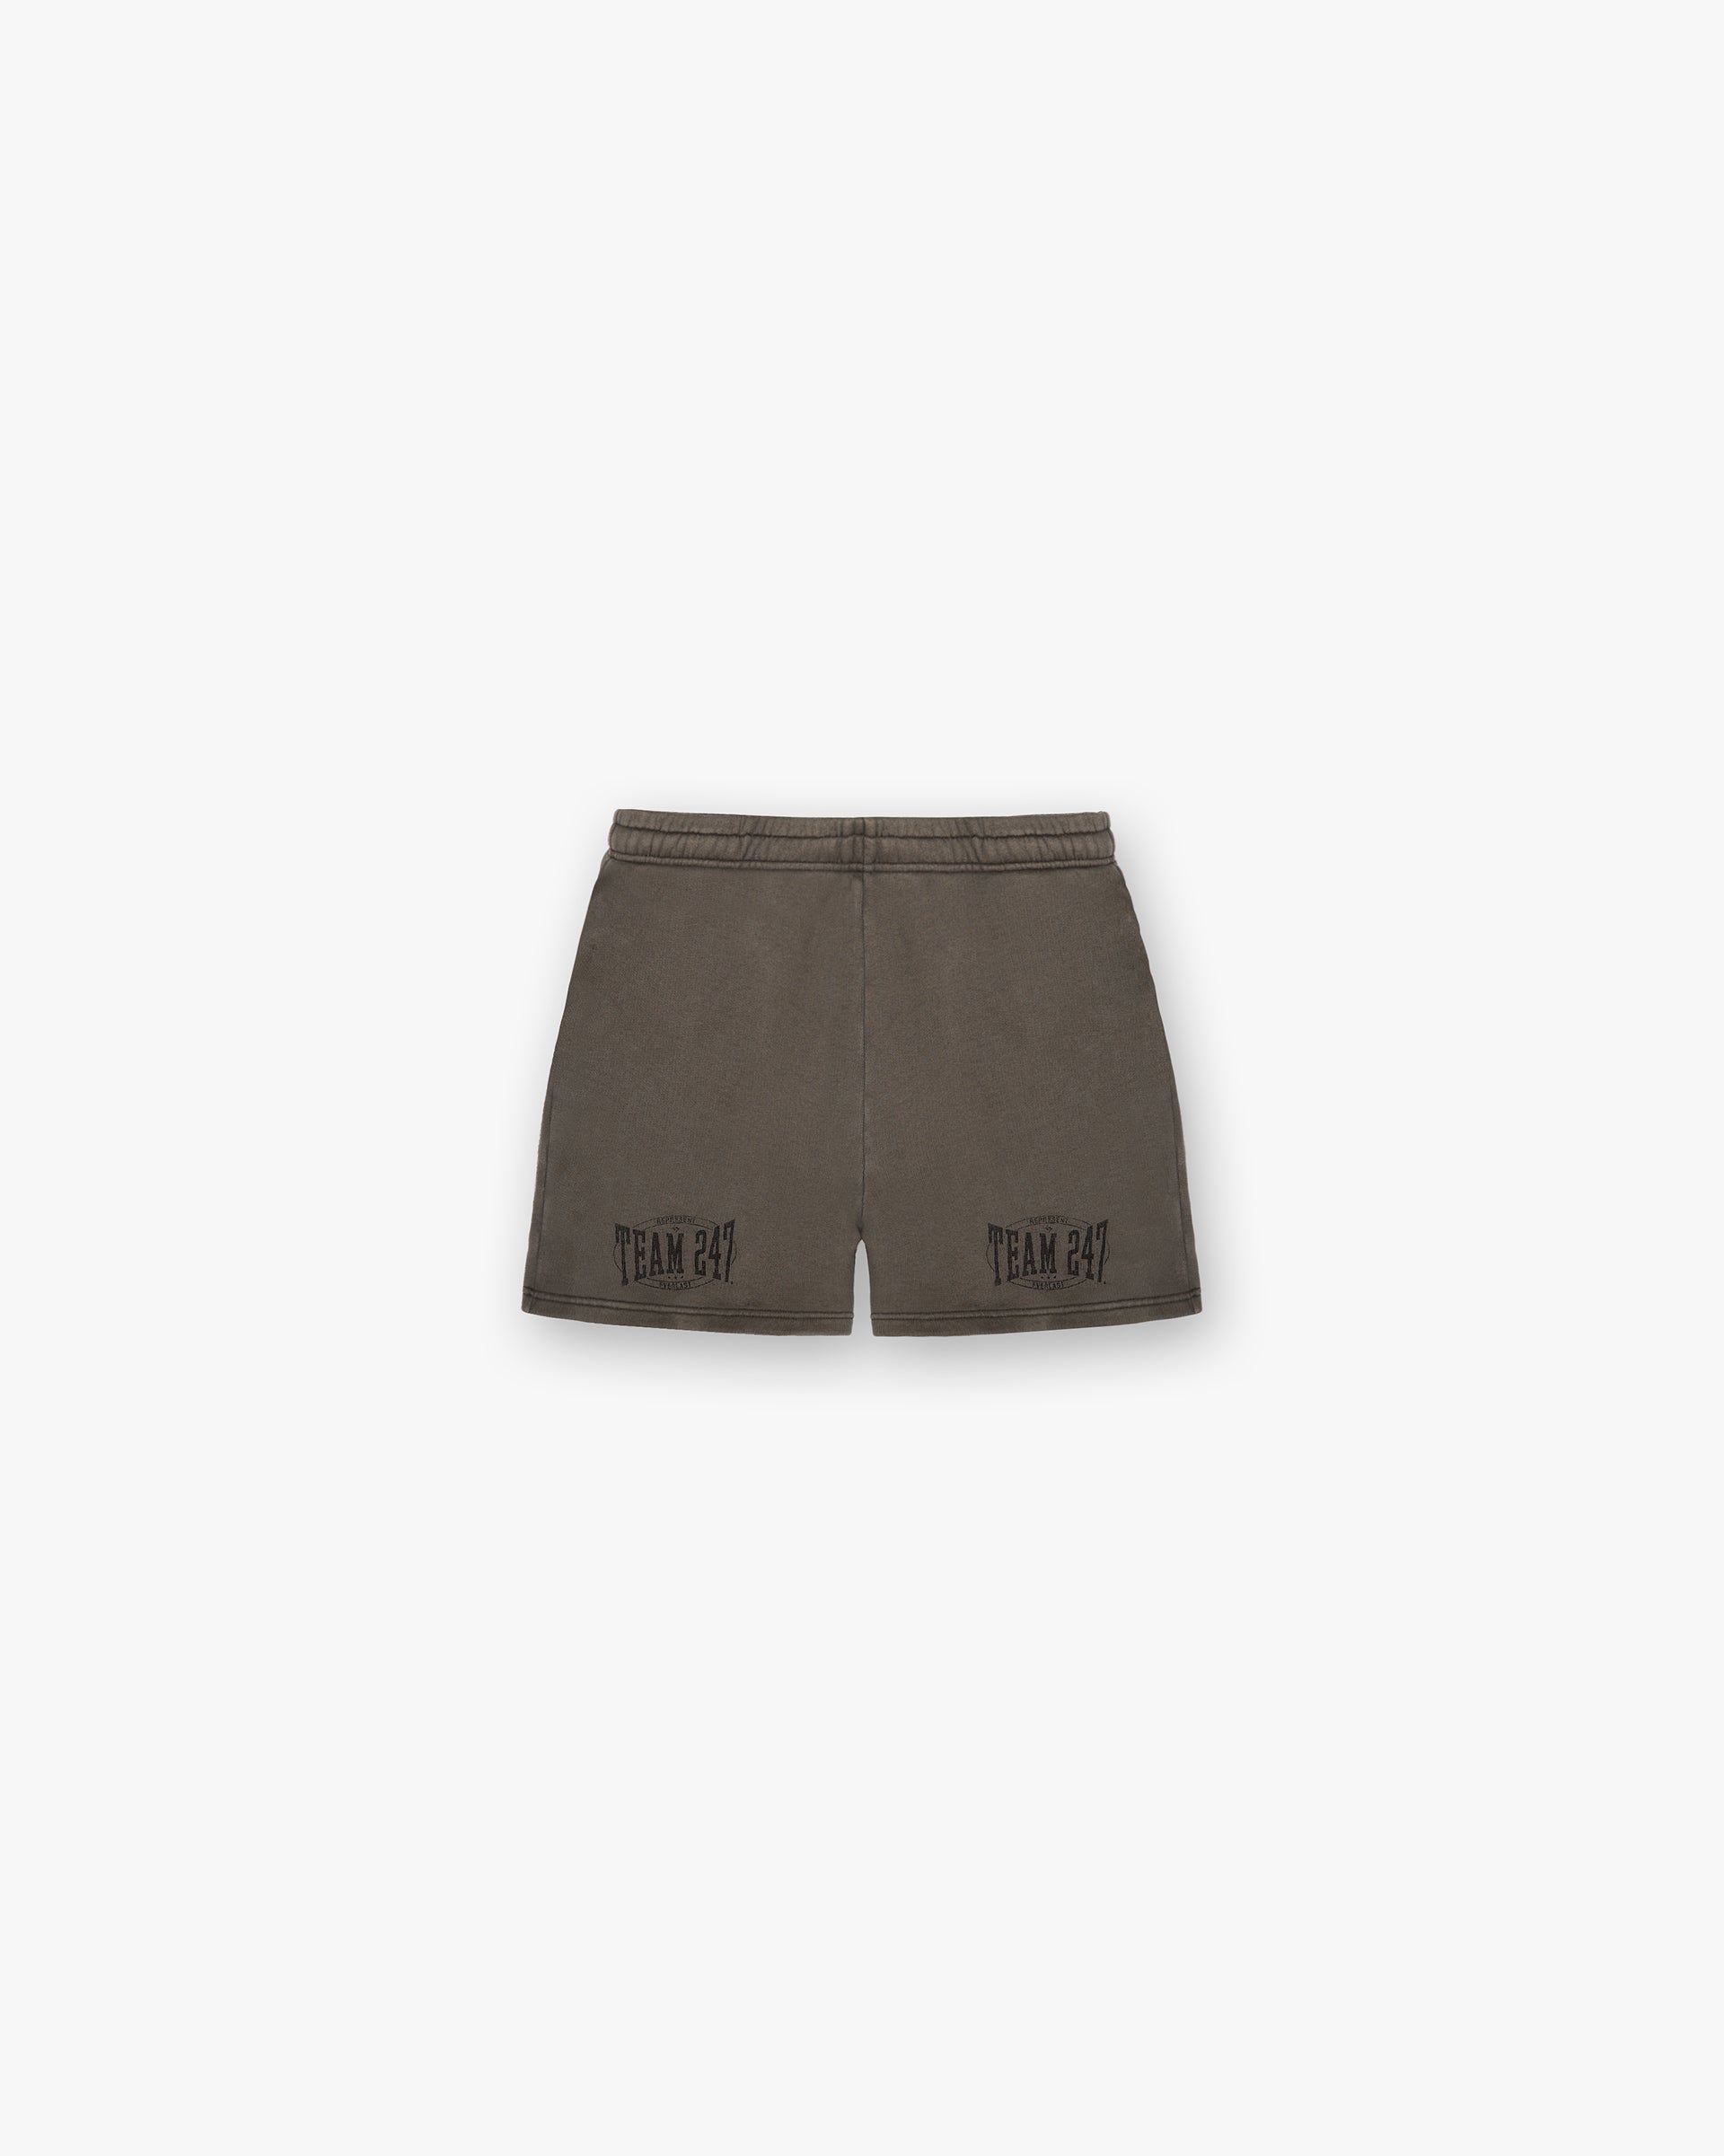 247 X Everlast Training Camp Jersey Shorts - Washed Brown